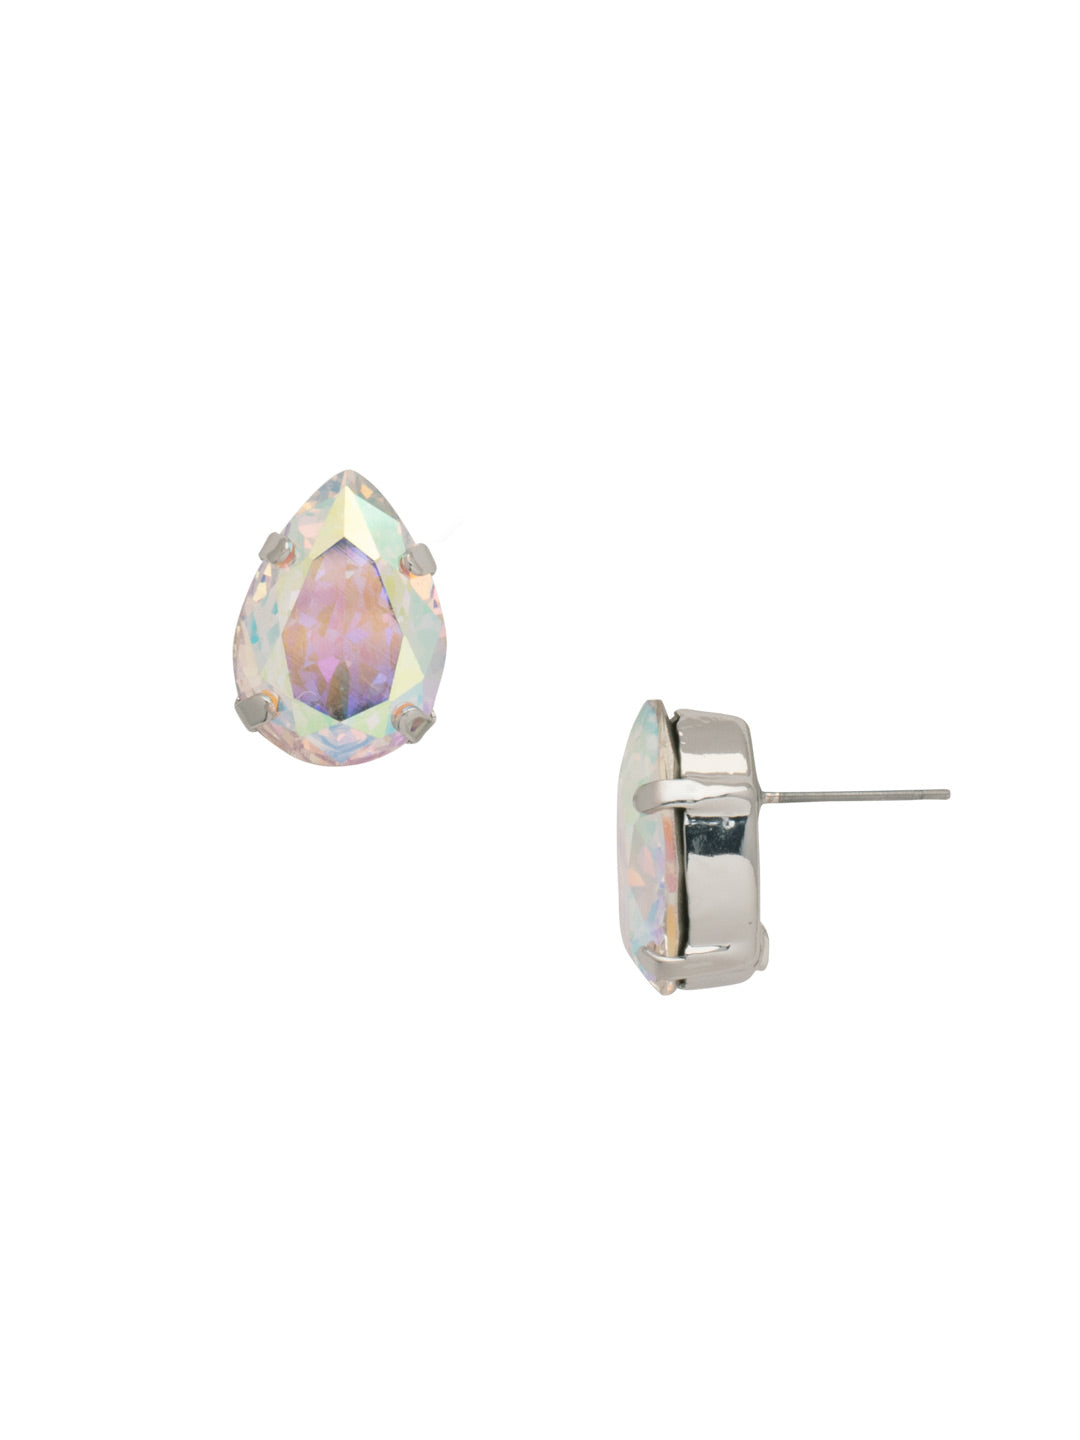 Eileen Stud Earrings - EFF100PDCAB - <p>The Eileen Stud Earrings feature a single pear cut candy gem crystal on a post. From Sorrelli's Crystal Aurora Borealis collection in our Palladium finish.</p>